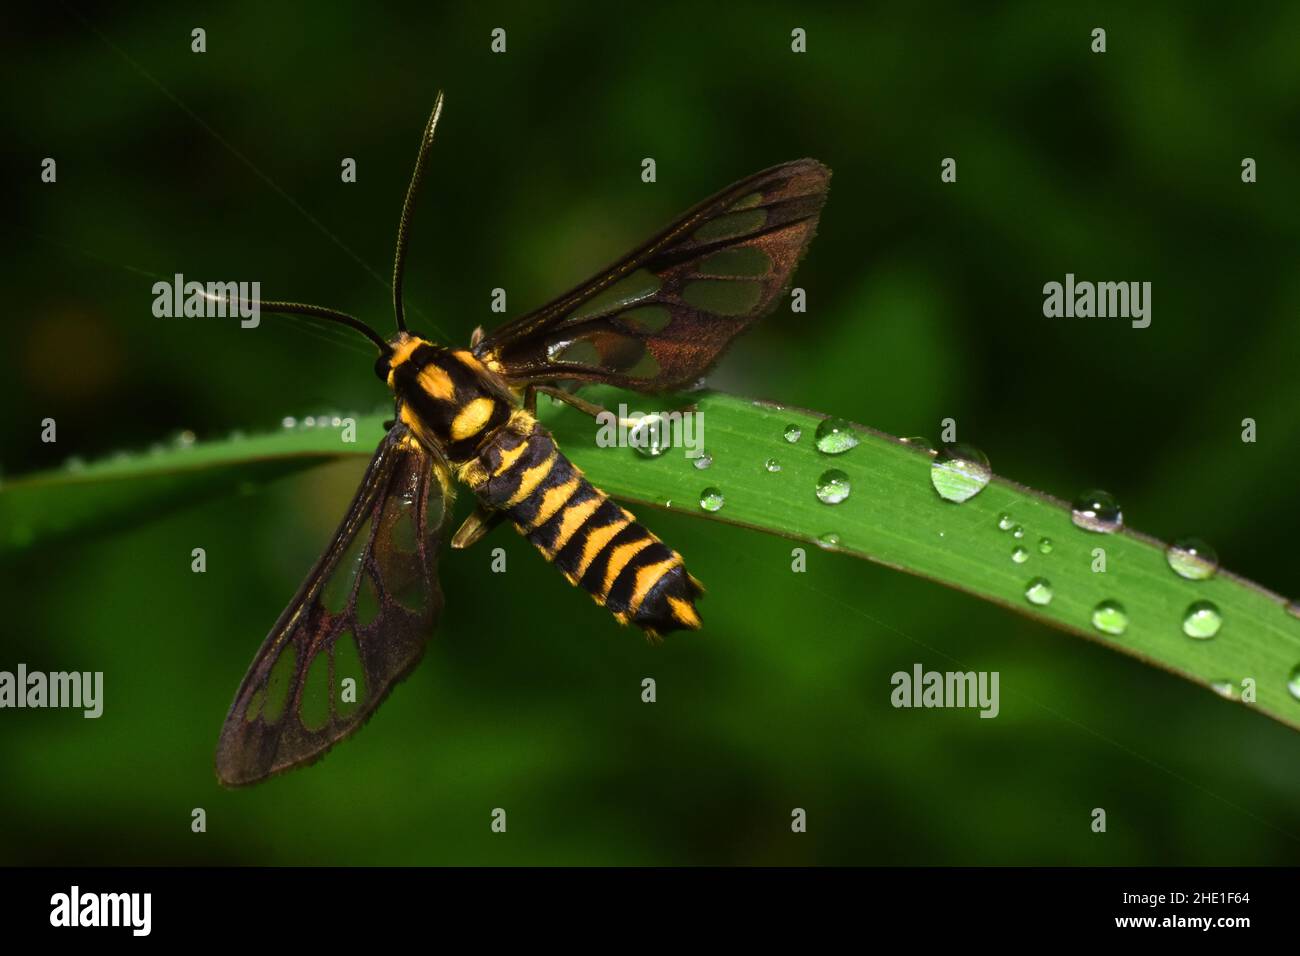 Tiger striped clearwing moth resting on near morning dews on green grass with blur nature background. Amata polymita. Stock Photo